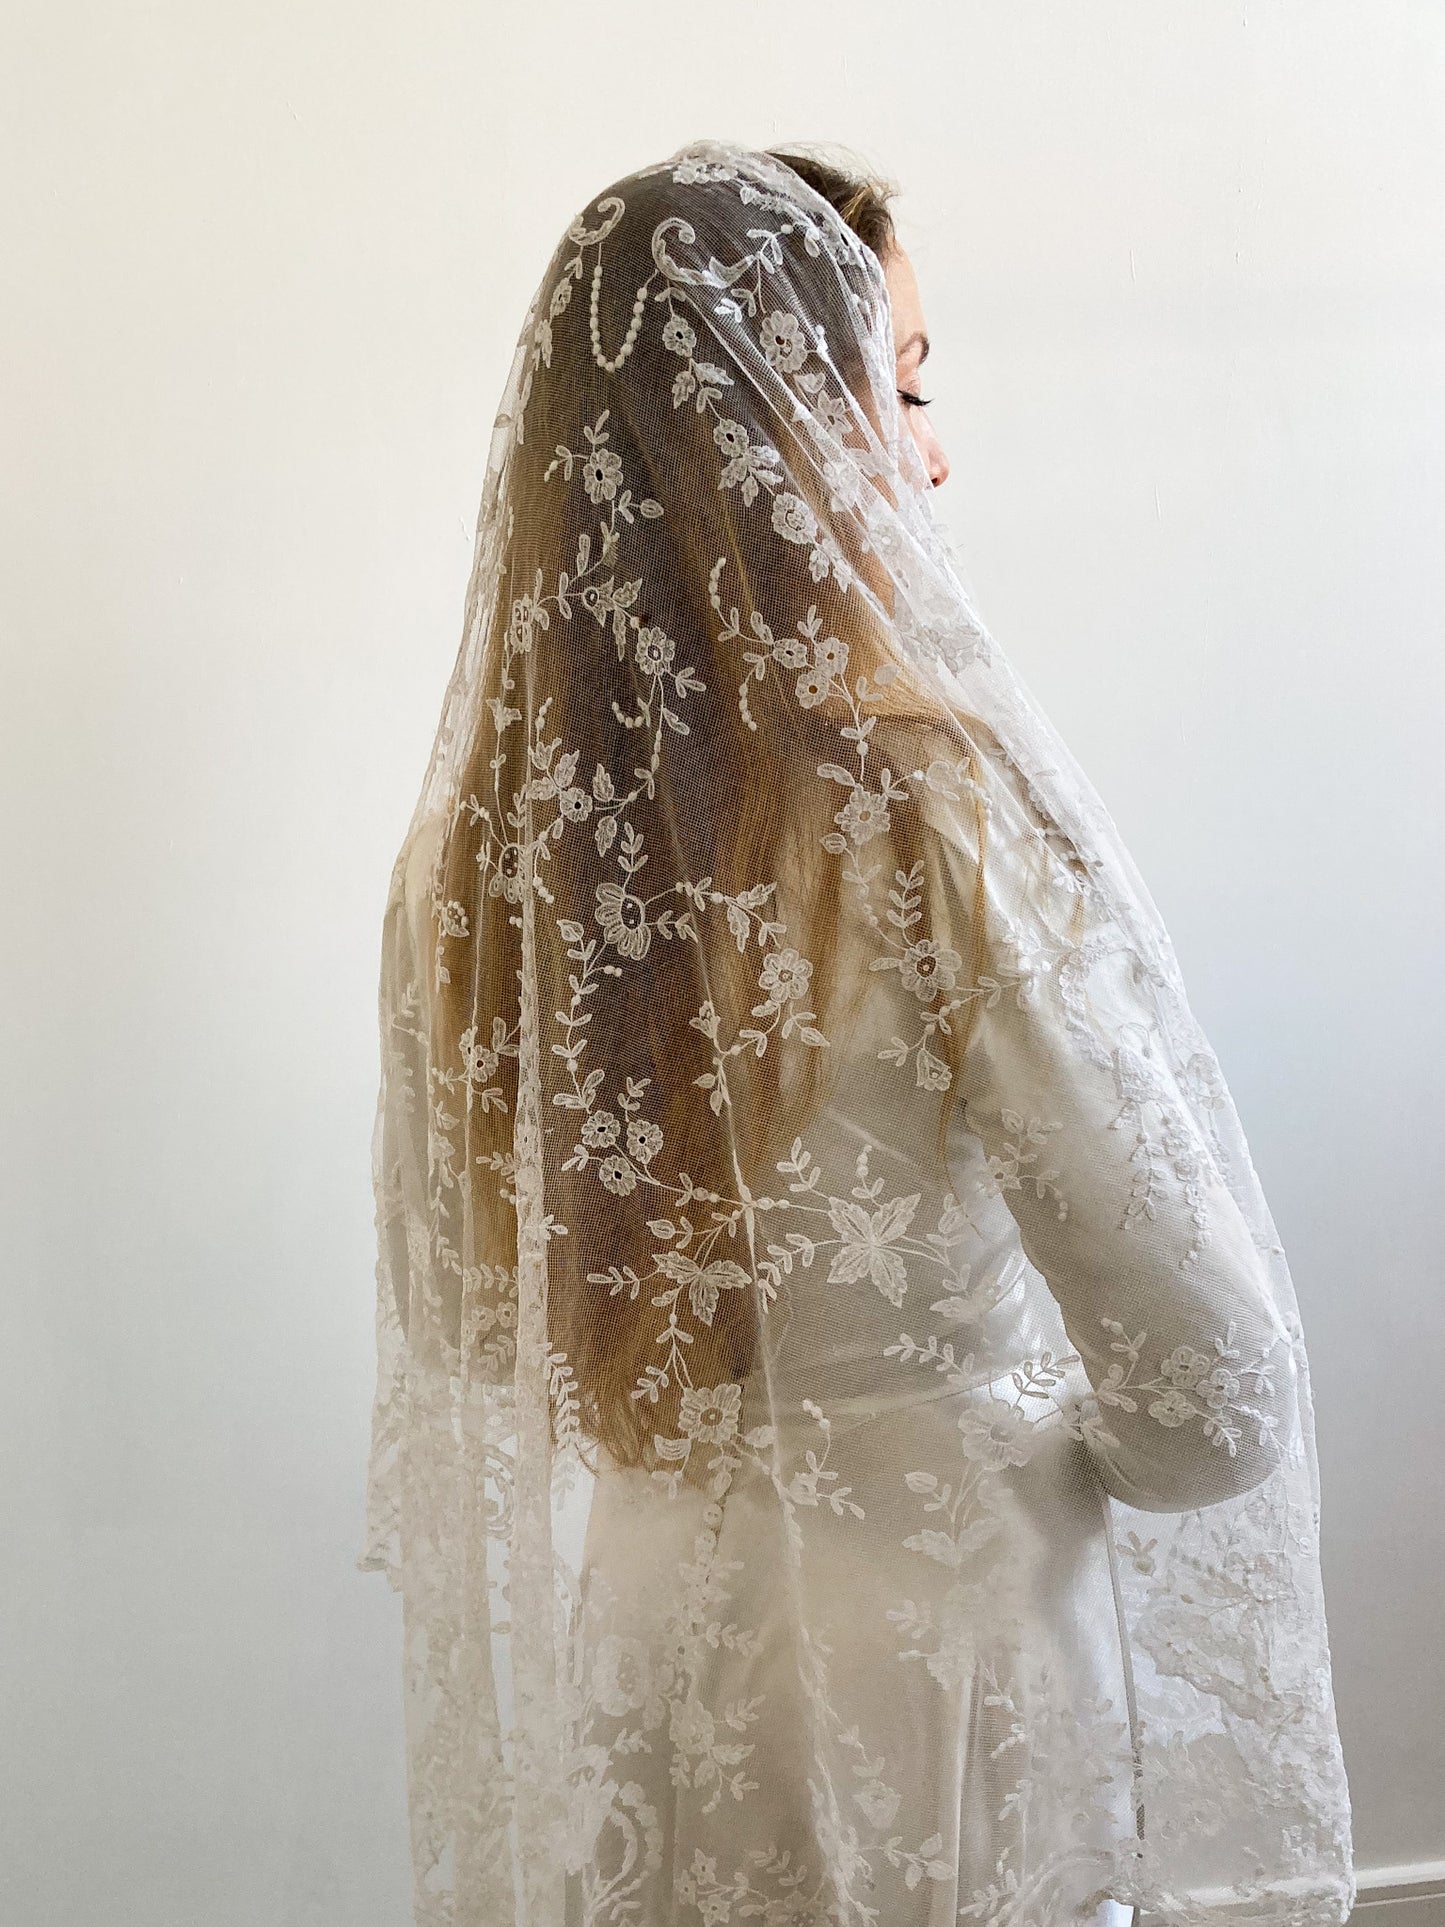 Antique Traingular Lace Veil with Flowerhead Embroidery & Scalloped Edging